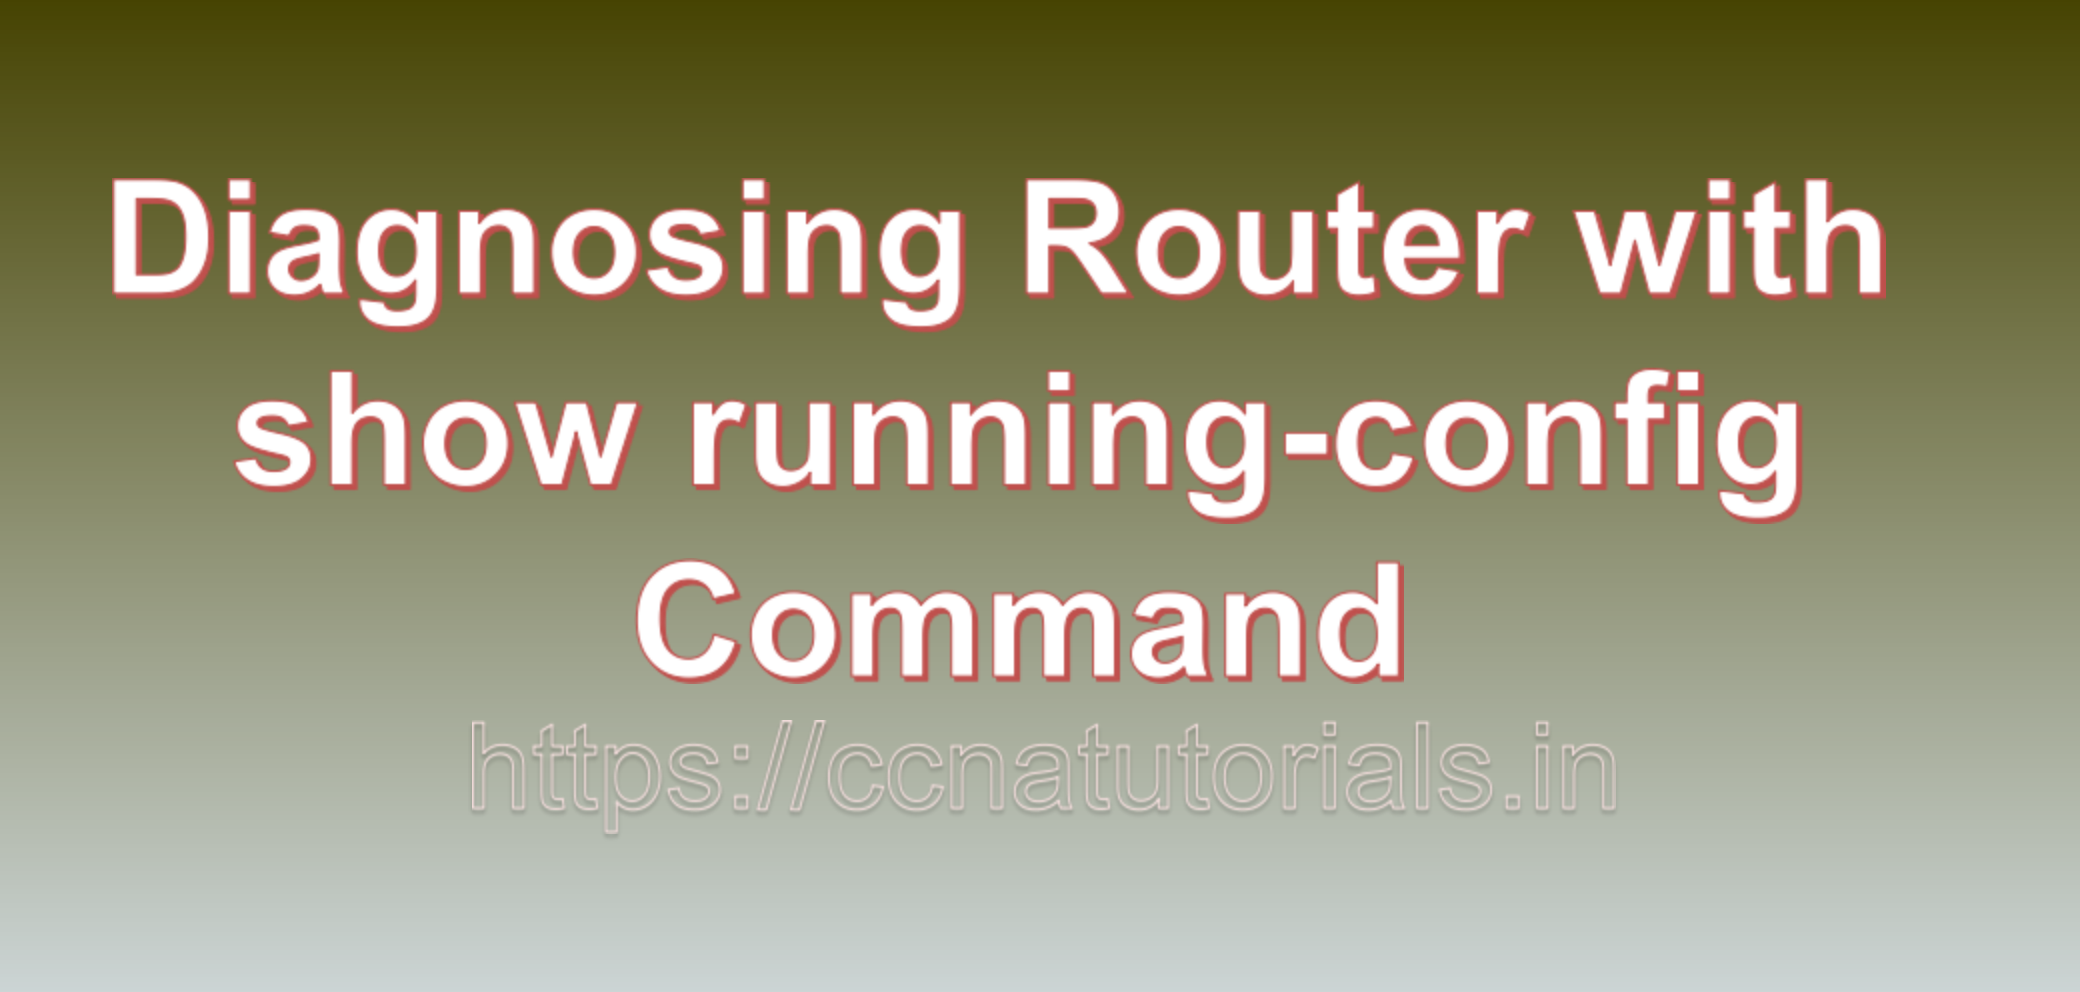 Diagnosing Router with show running-config Command , ccna, ccna tutorials